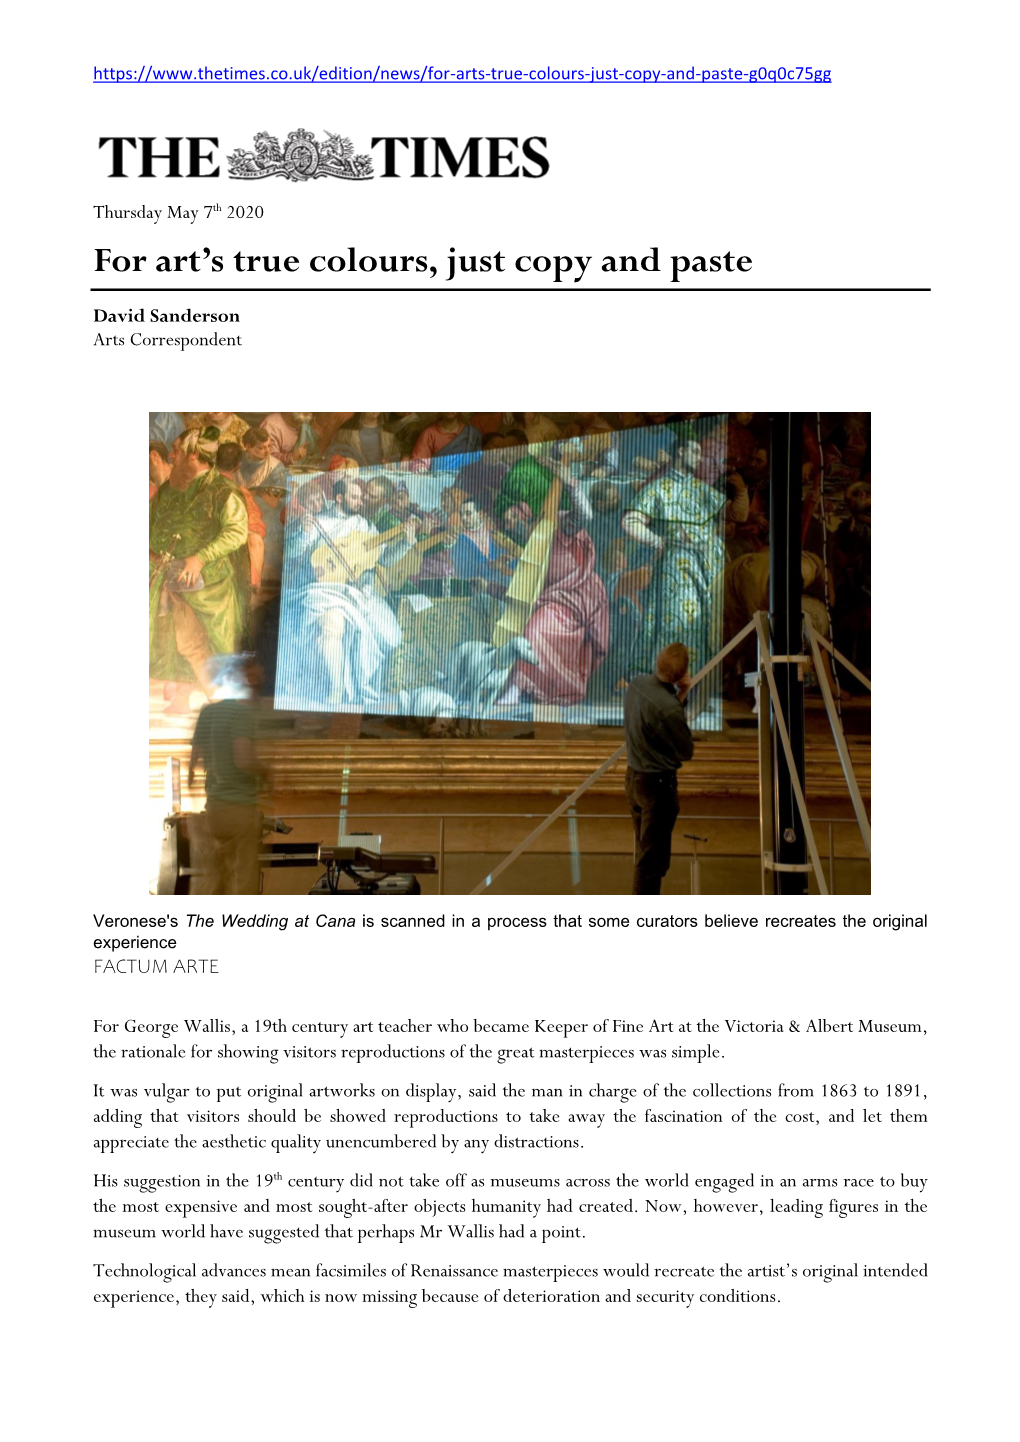 For Art's True Colours, Just Copy and Paste